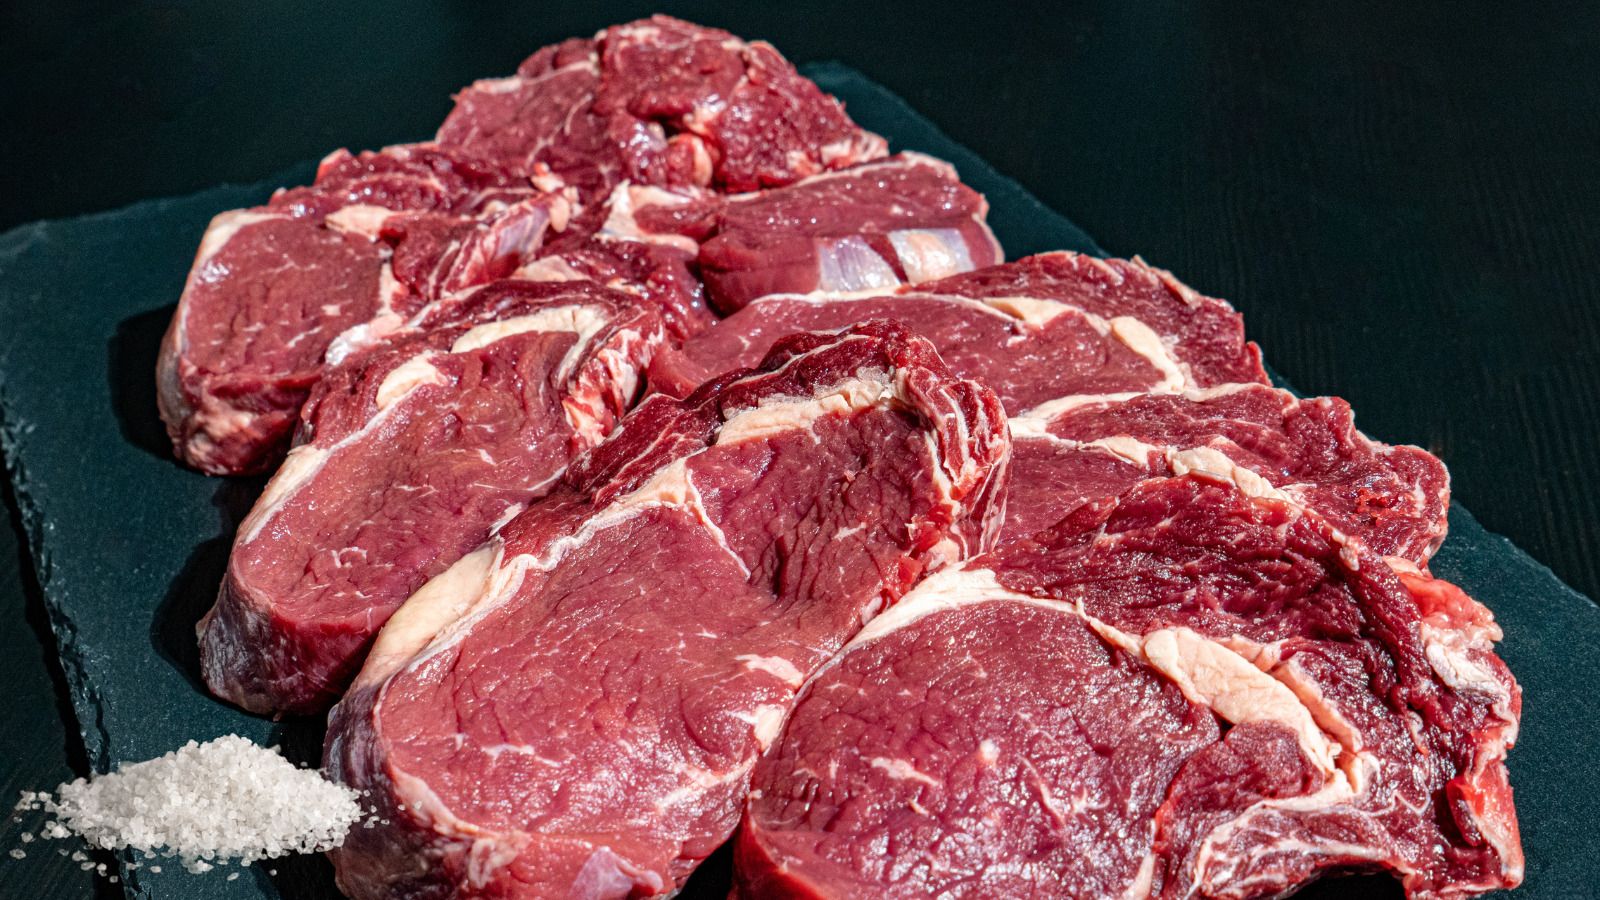 Have You Heard About “Ruminant Meats”?  Read This!